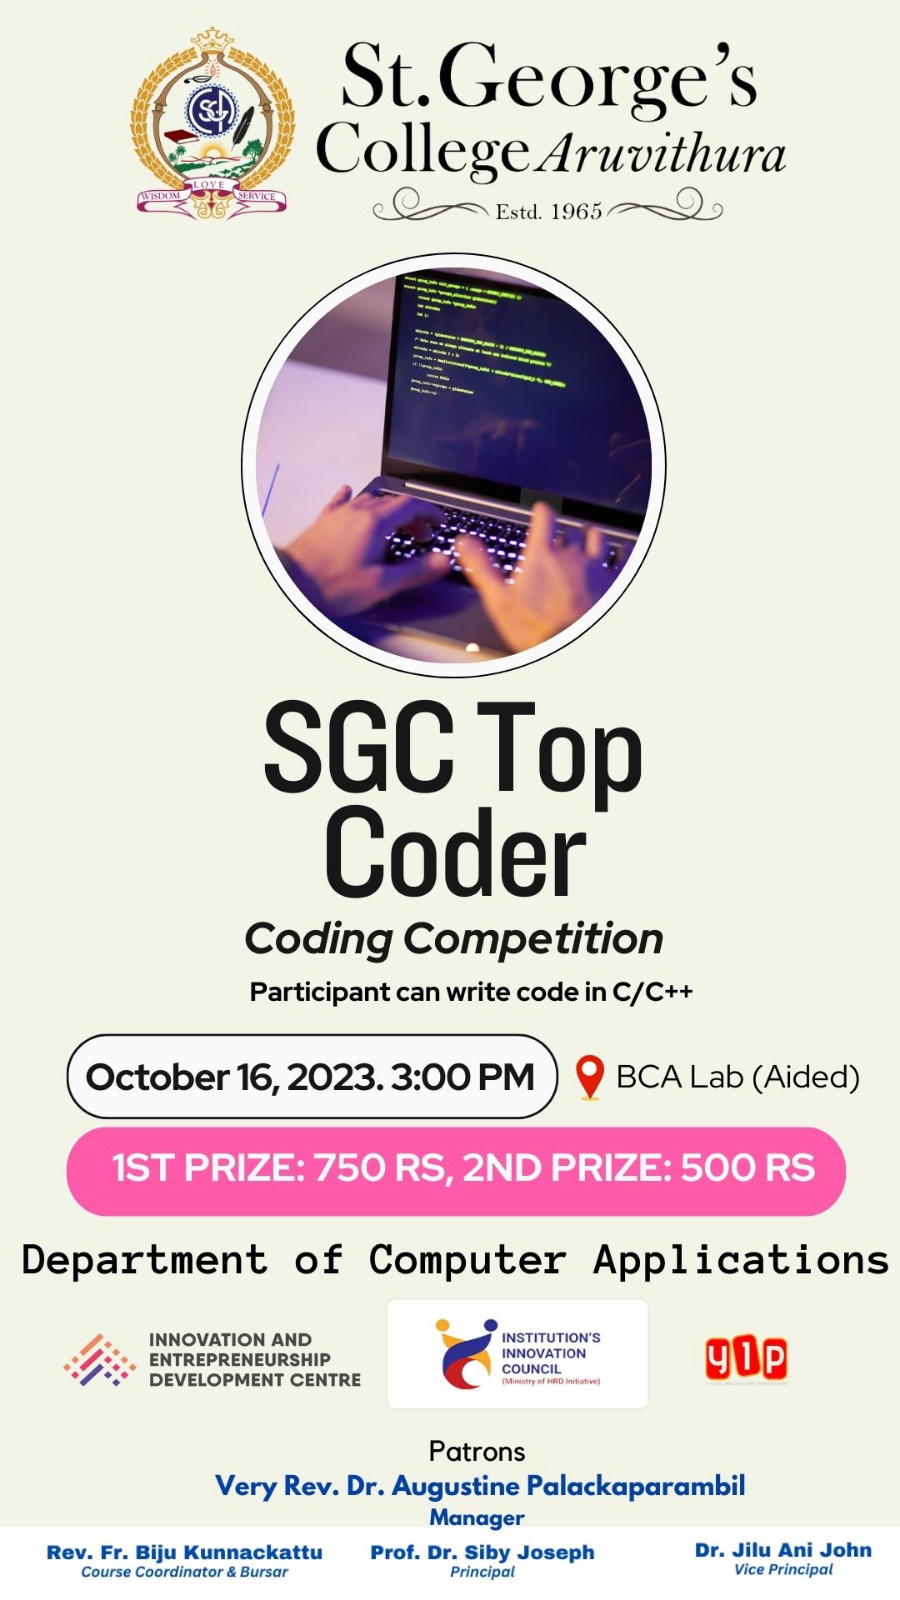 SGC Top Coder: Coding Competition